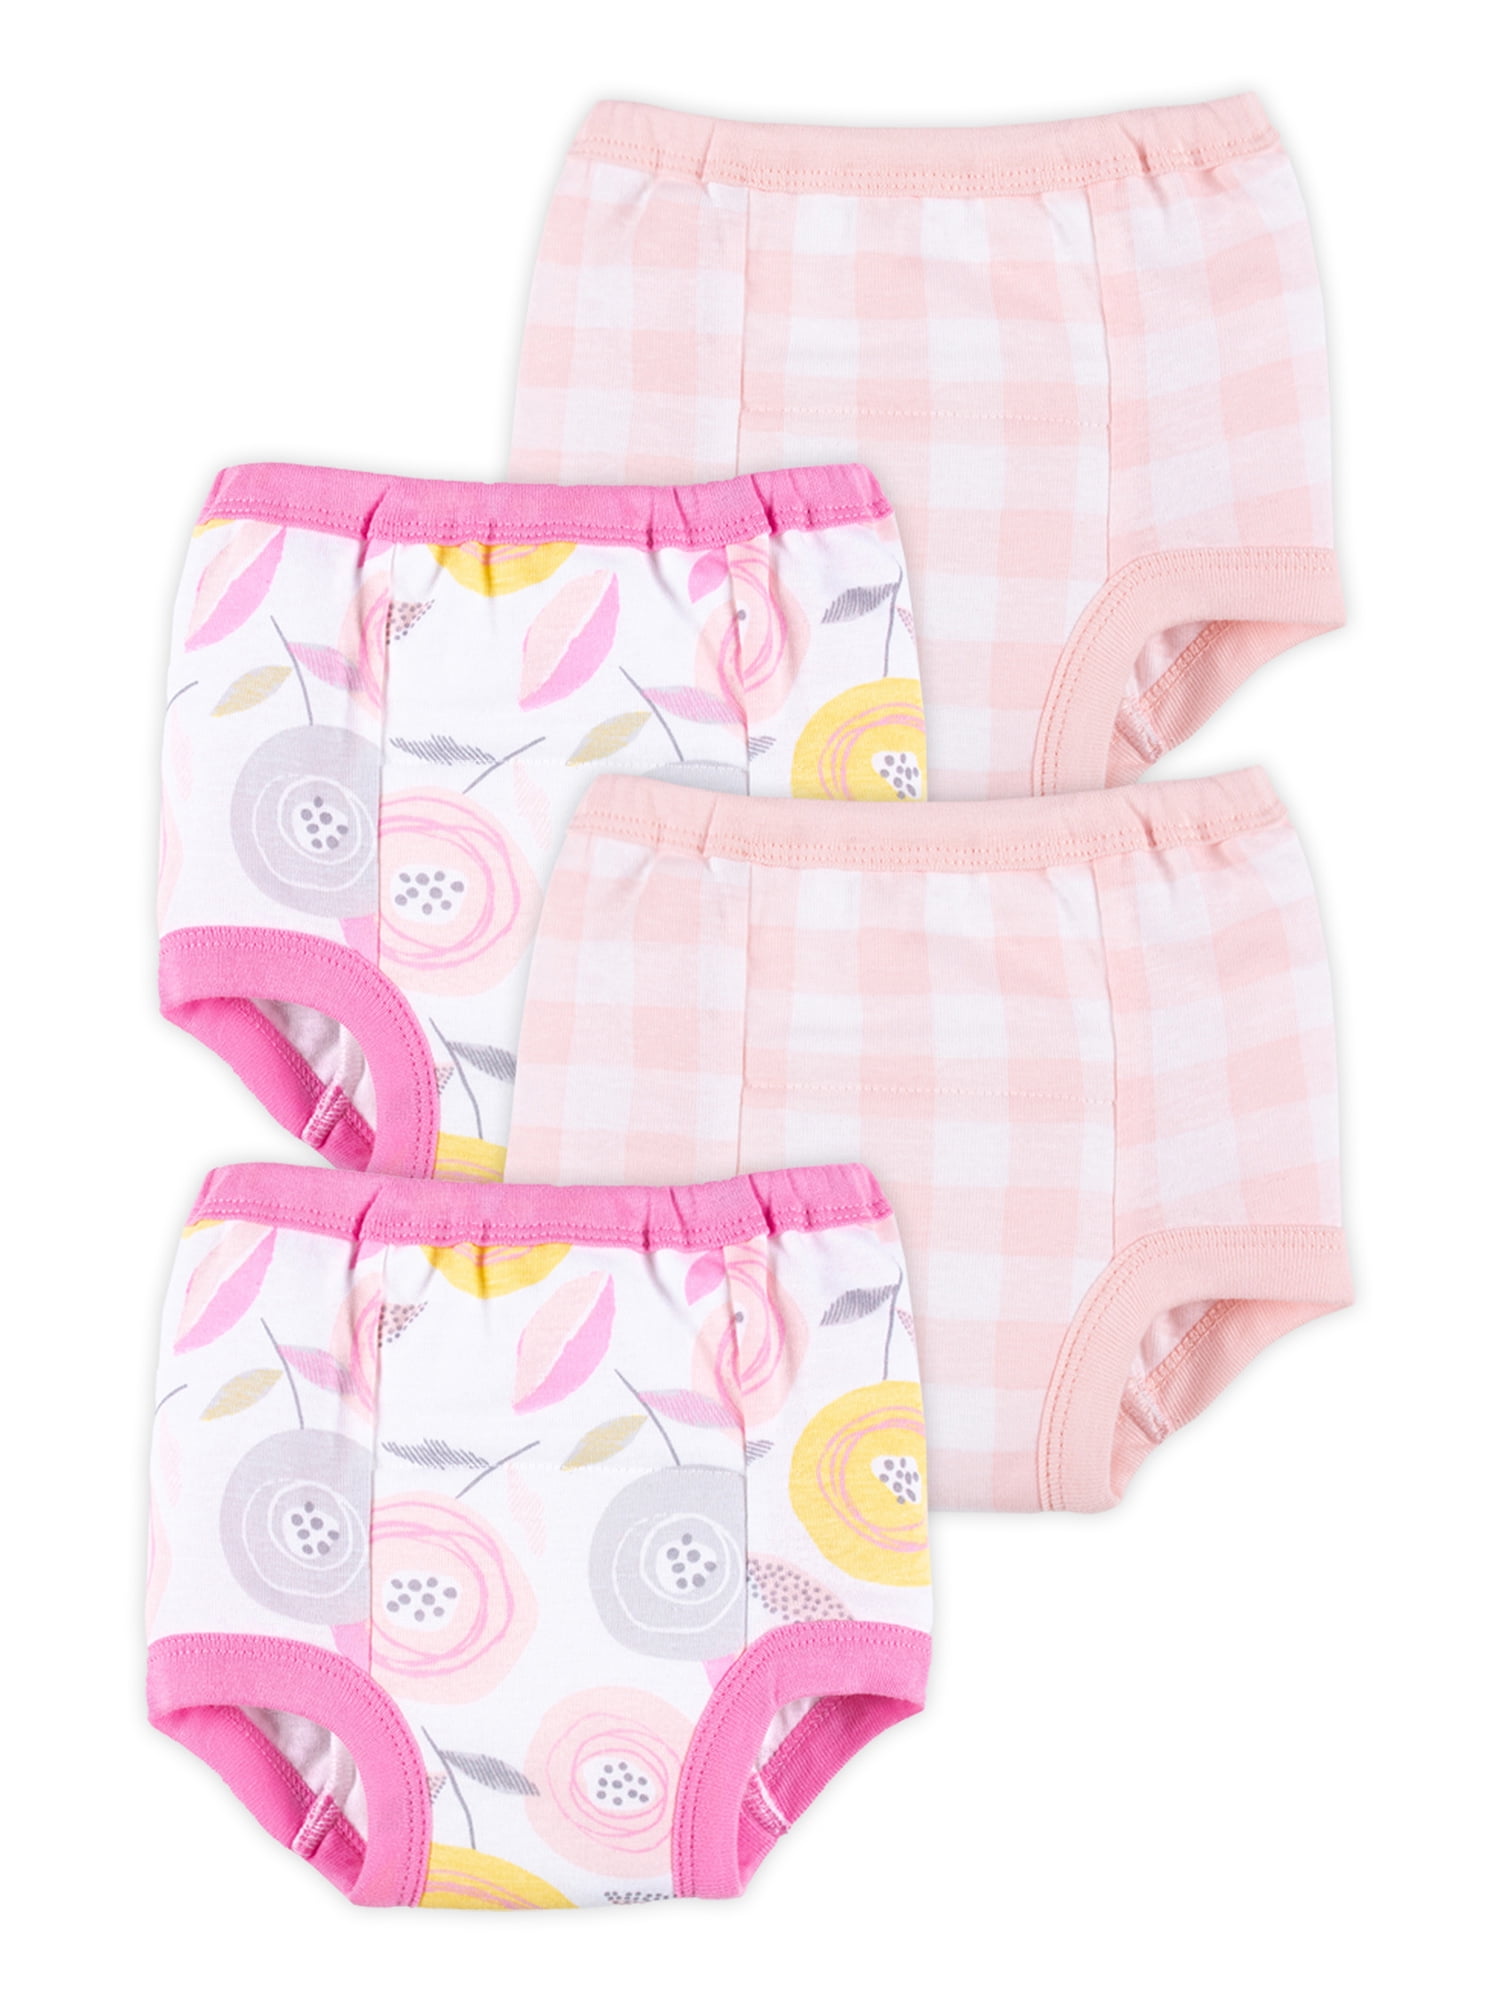  Baby Cotton Training Pants 4 Pack Padded Toddler Potty Training  Underwear for Girls 12M-4T (A, 3T) : Baby